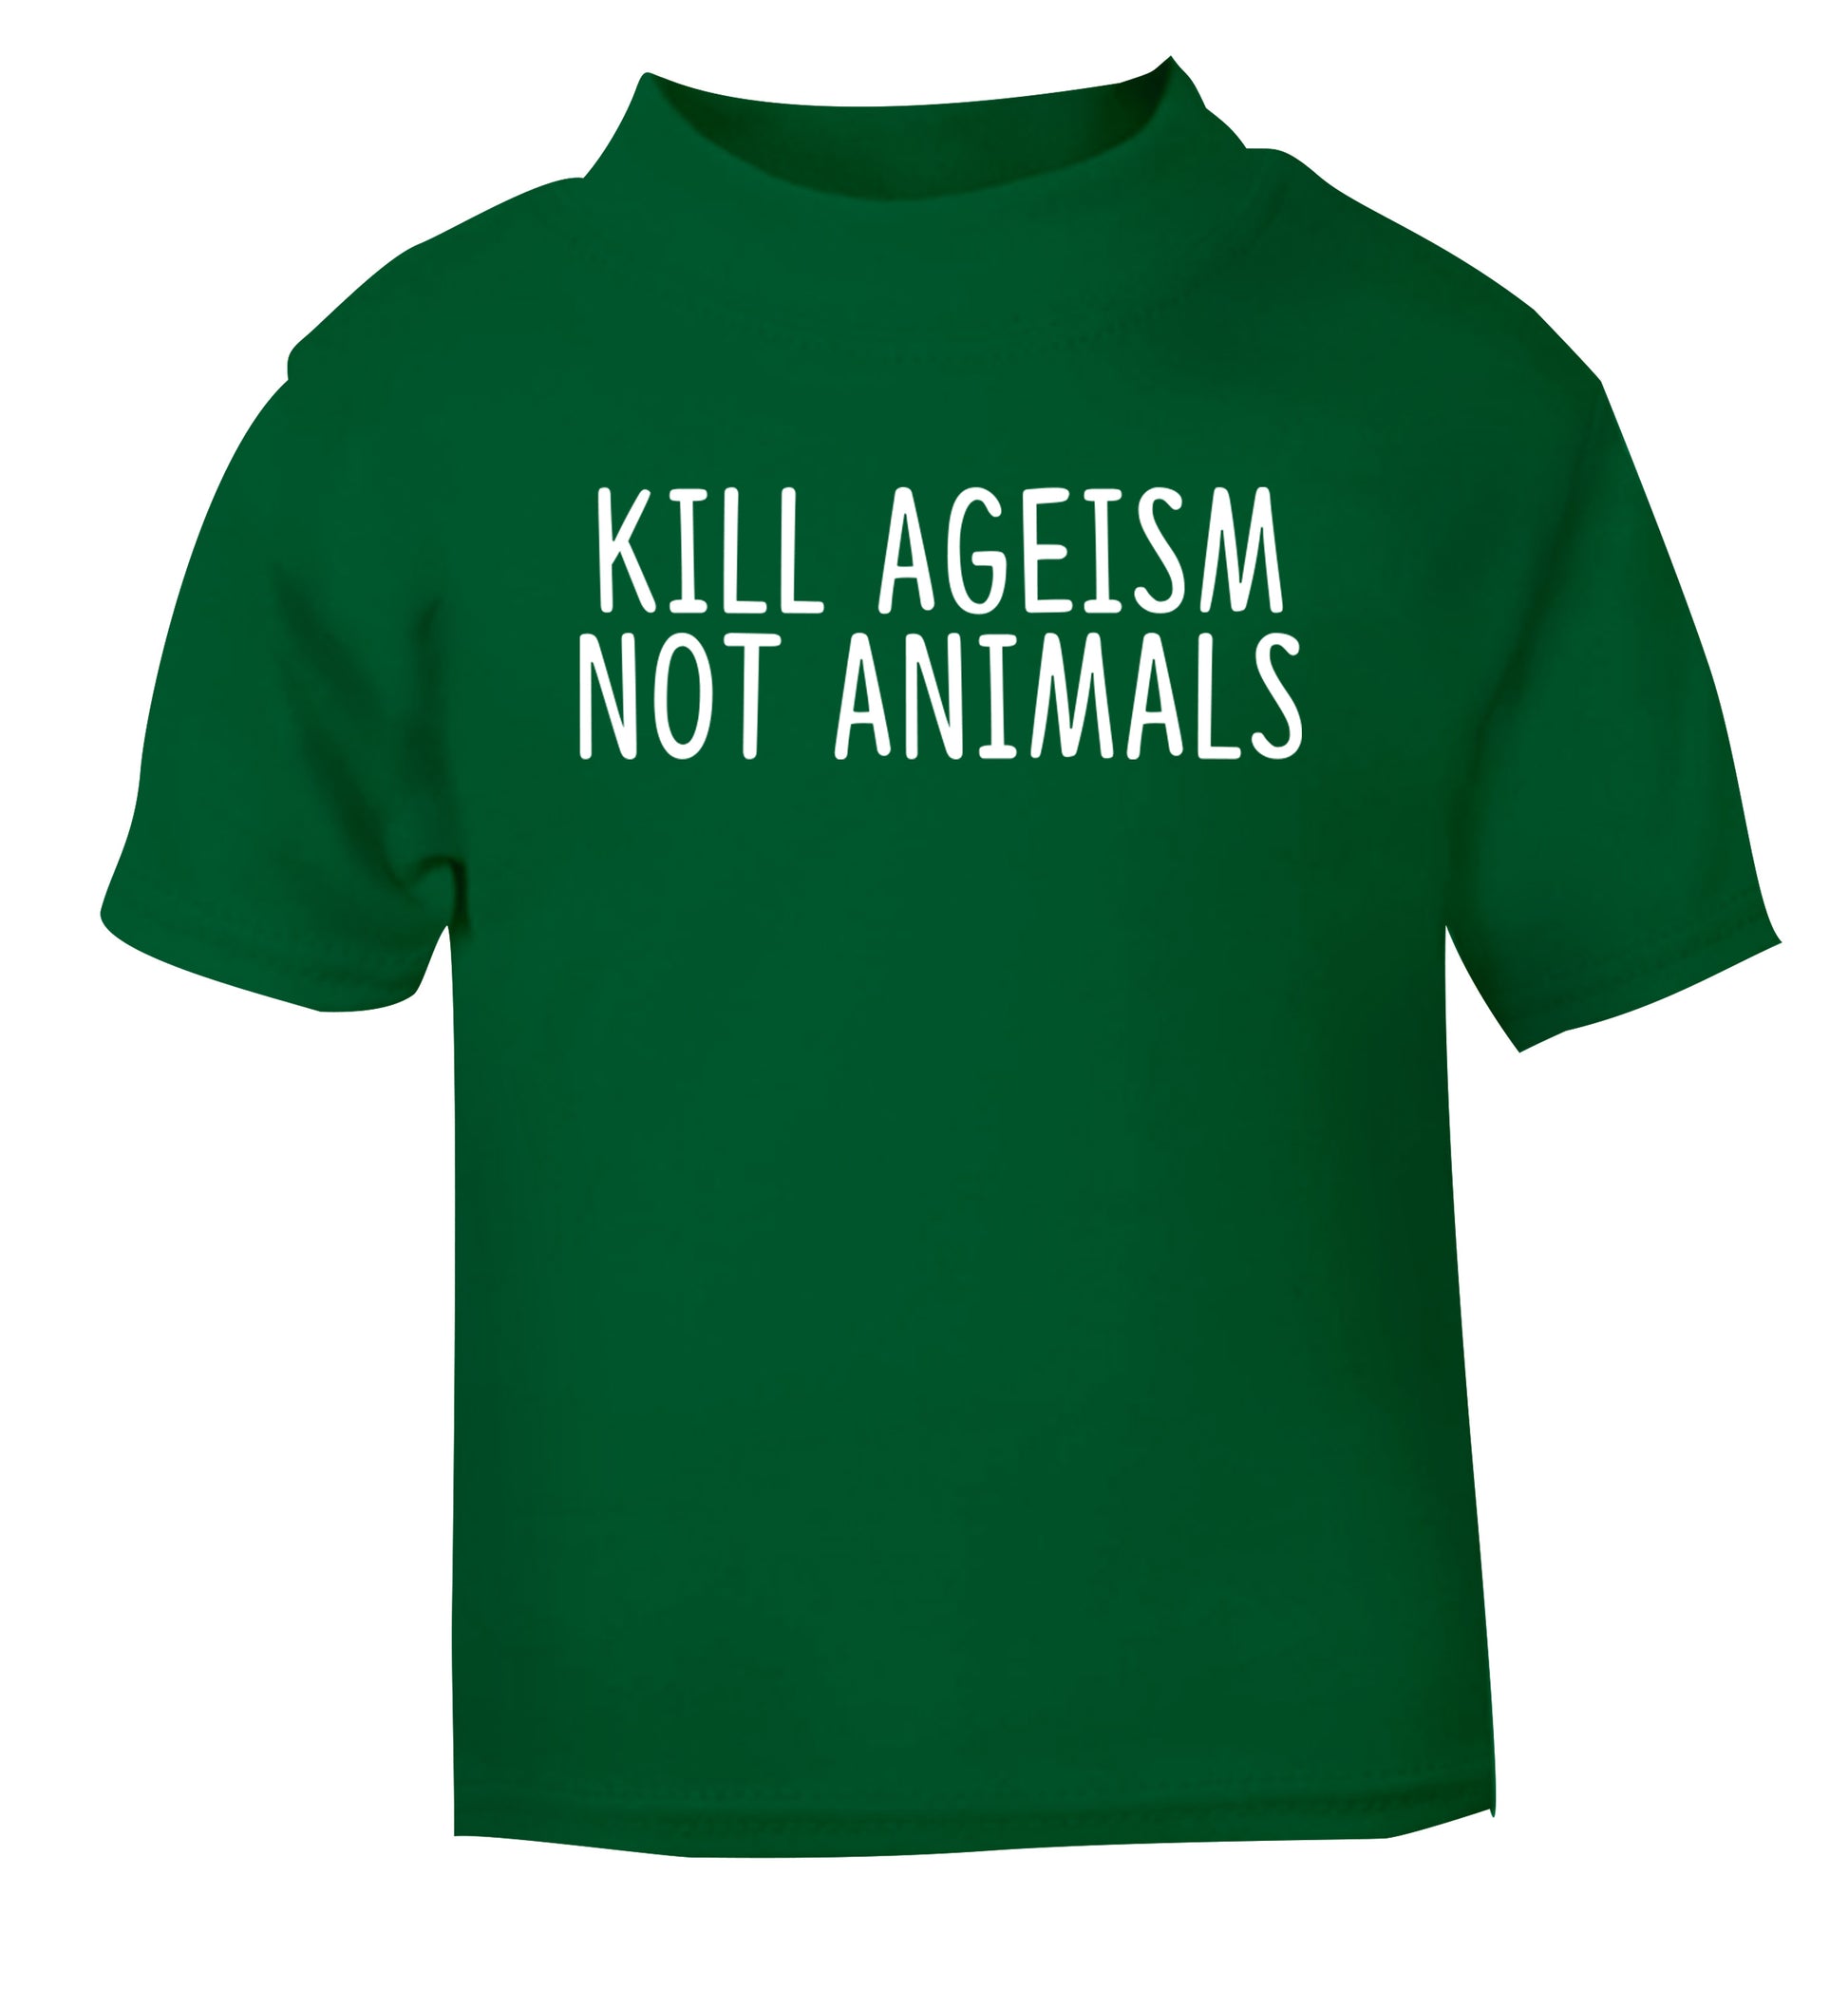 Kill Ageism Not Animals green Baby Toddler Tshirt 2 Years